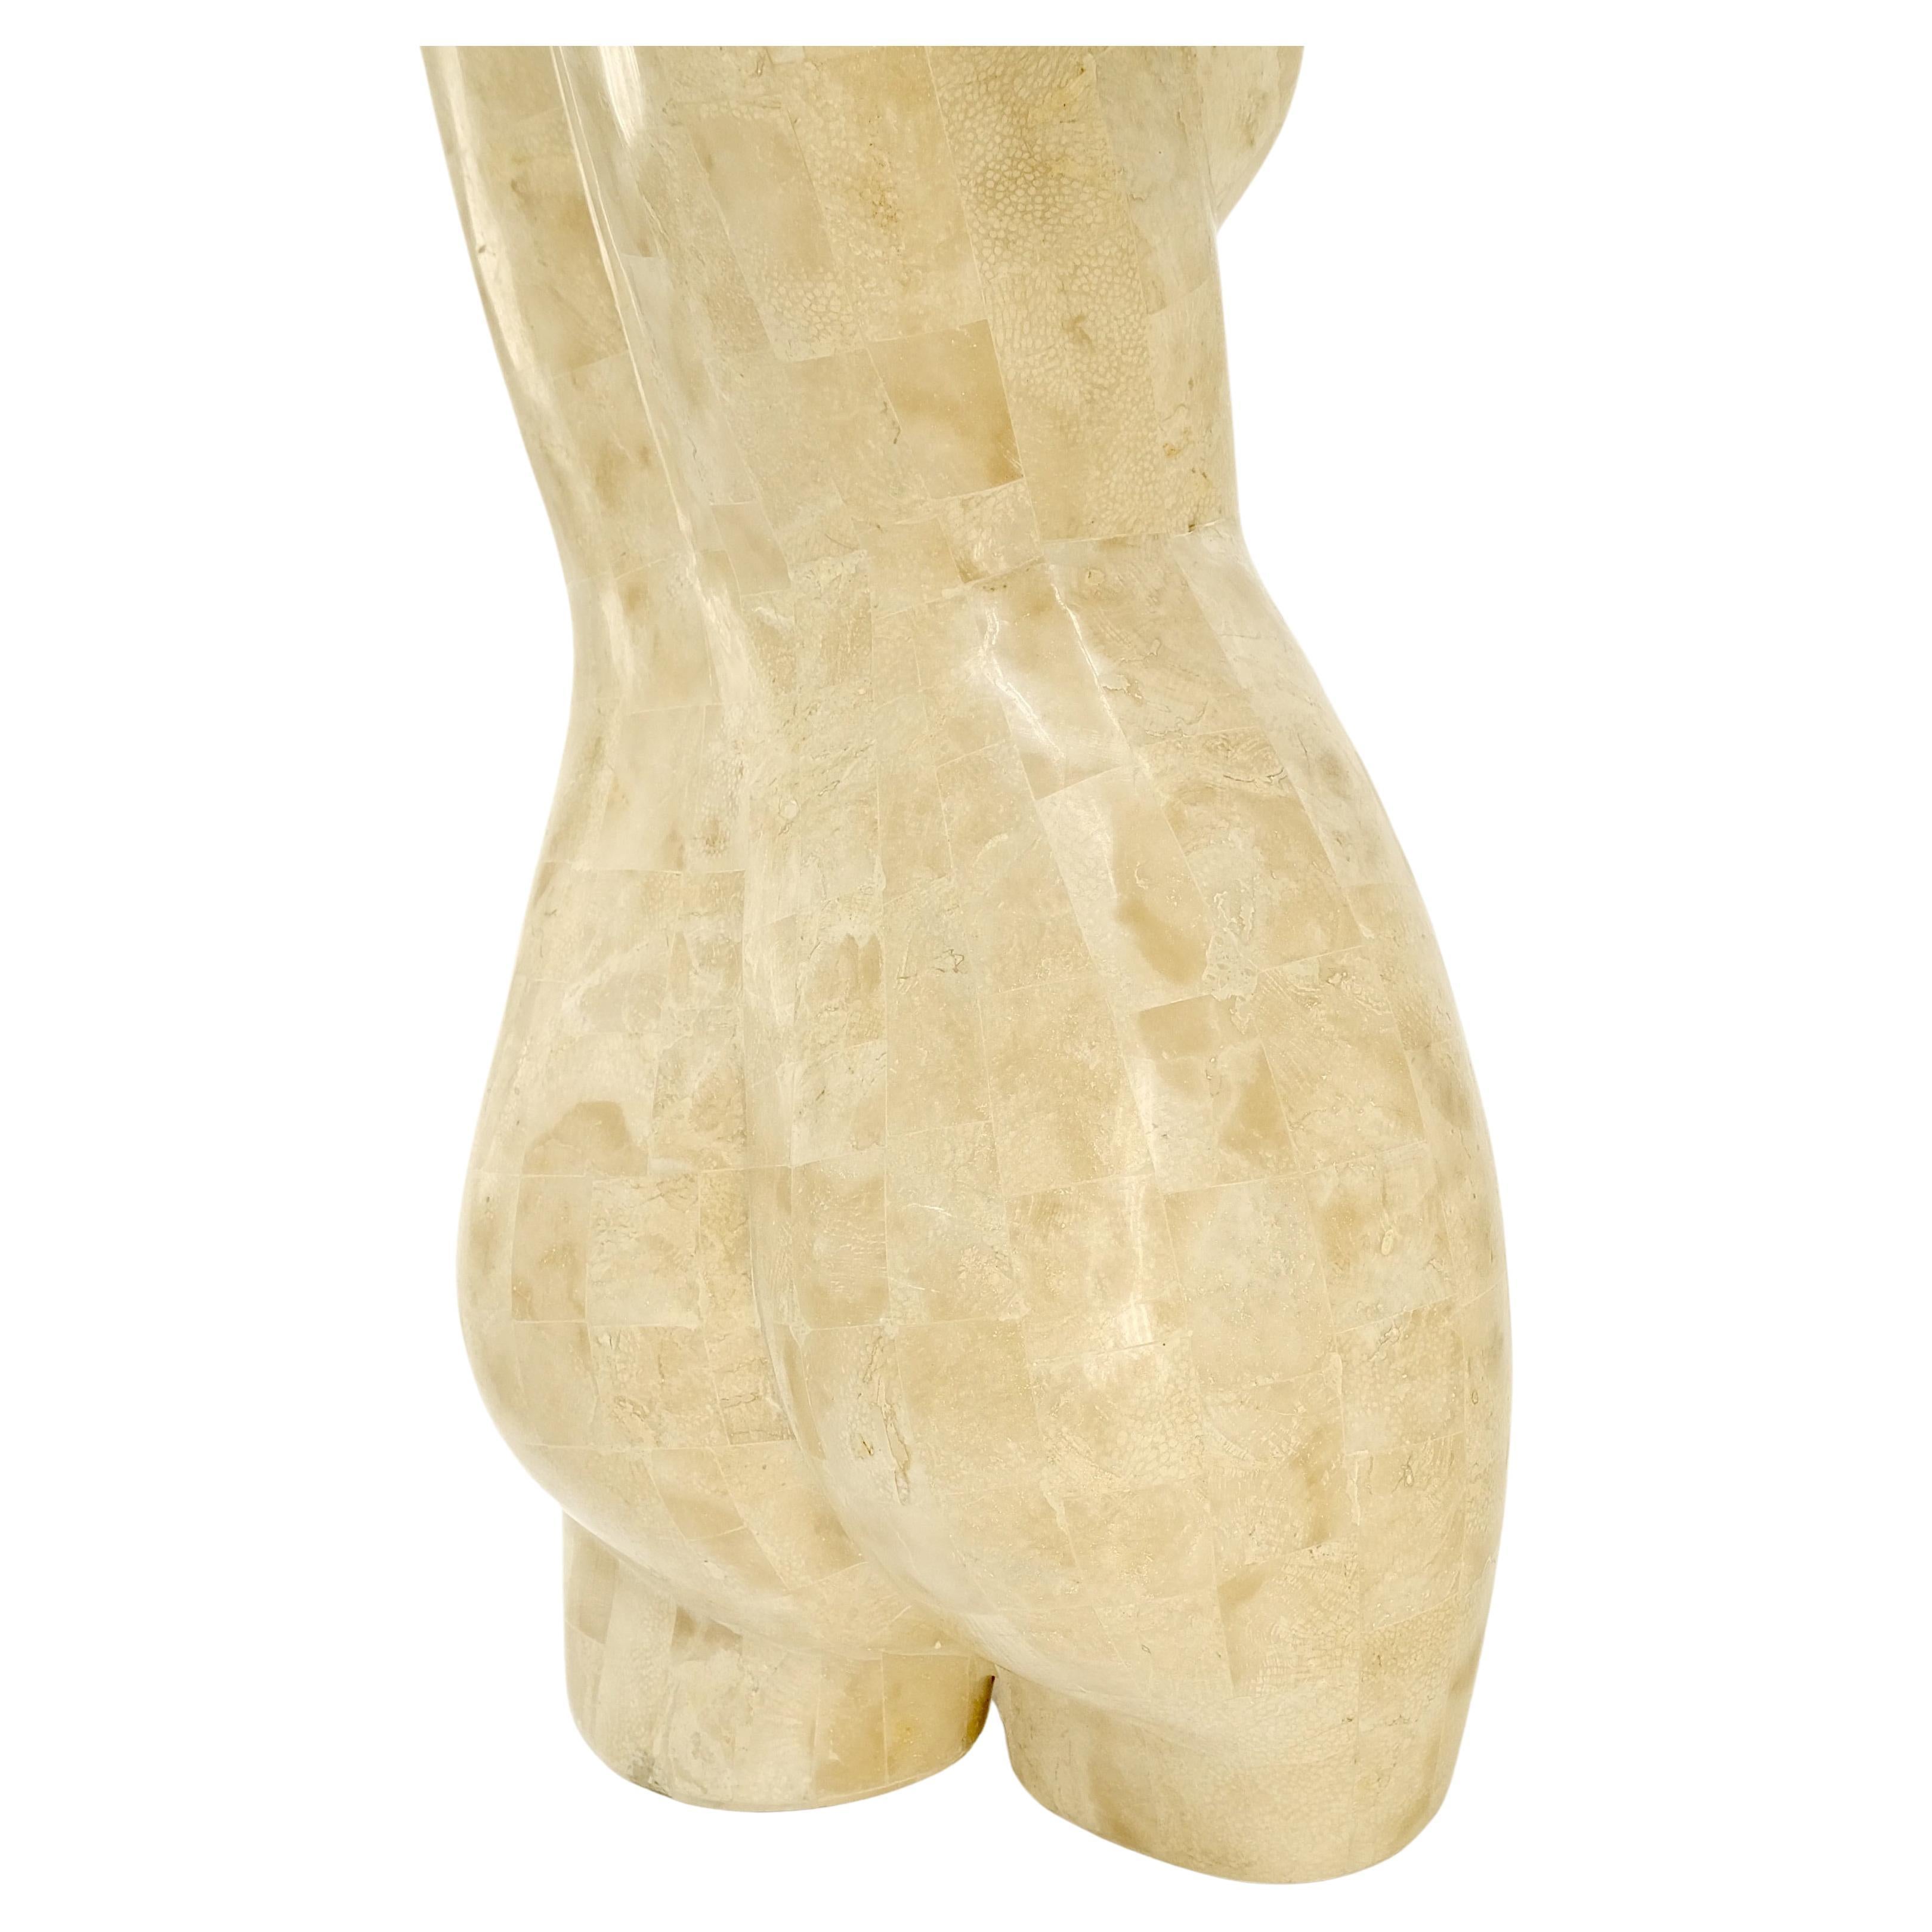 Tessellated Stone Marble Travertine Sculpture of Nude Female Torso Mint! For Sale 8